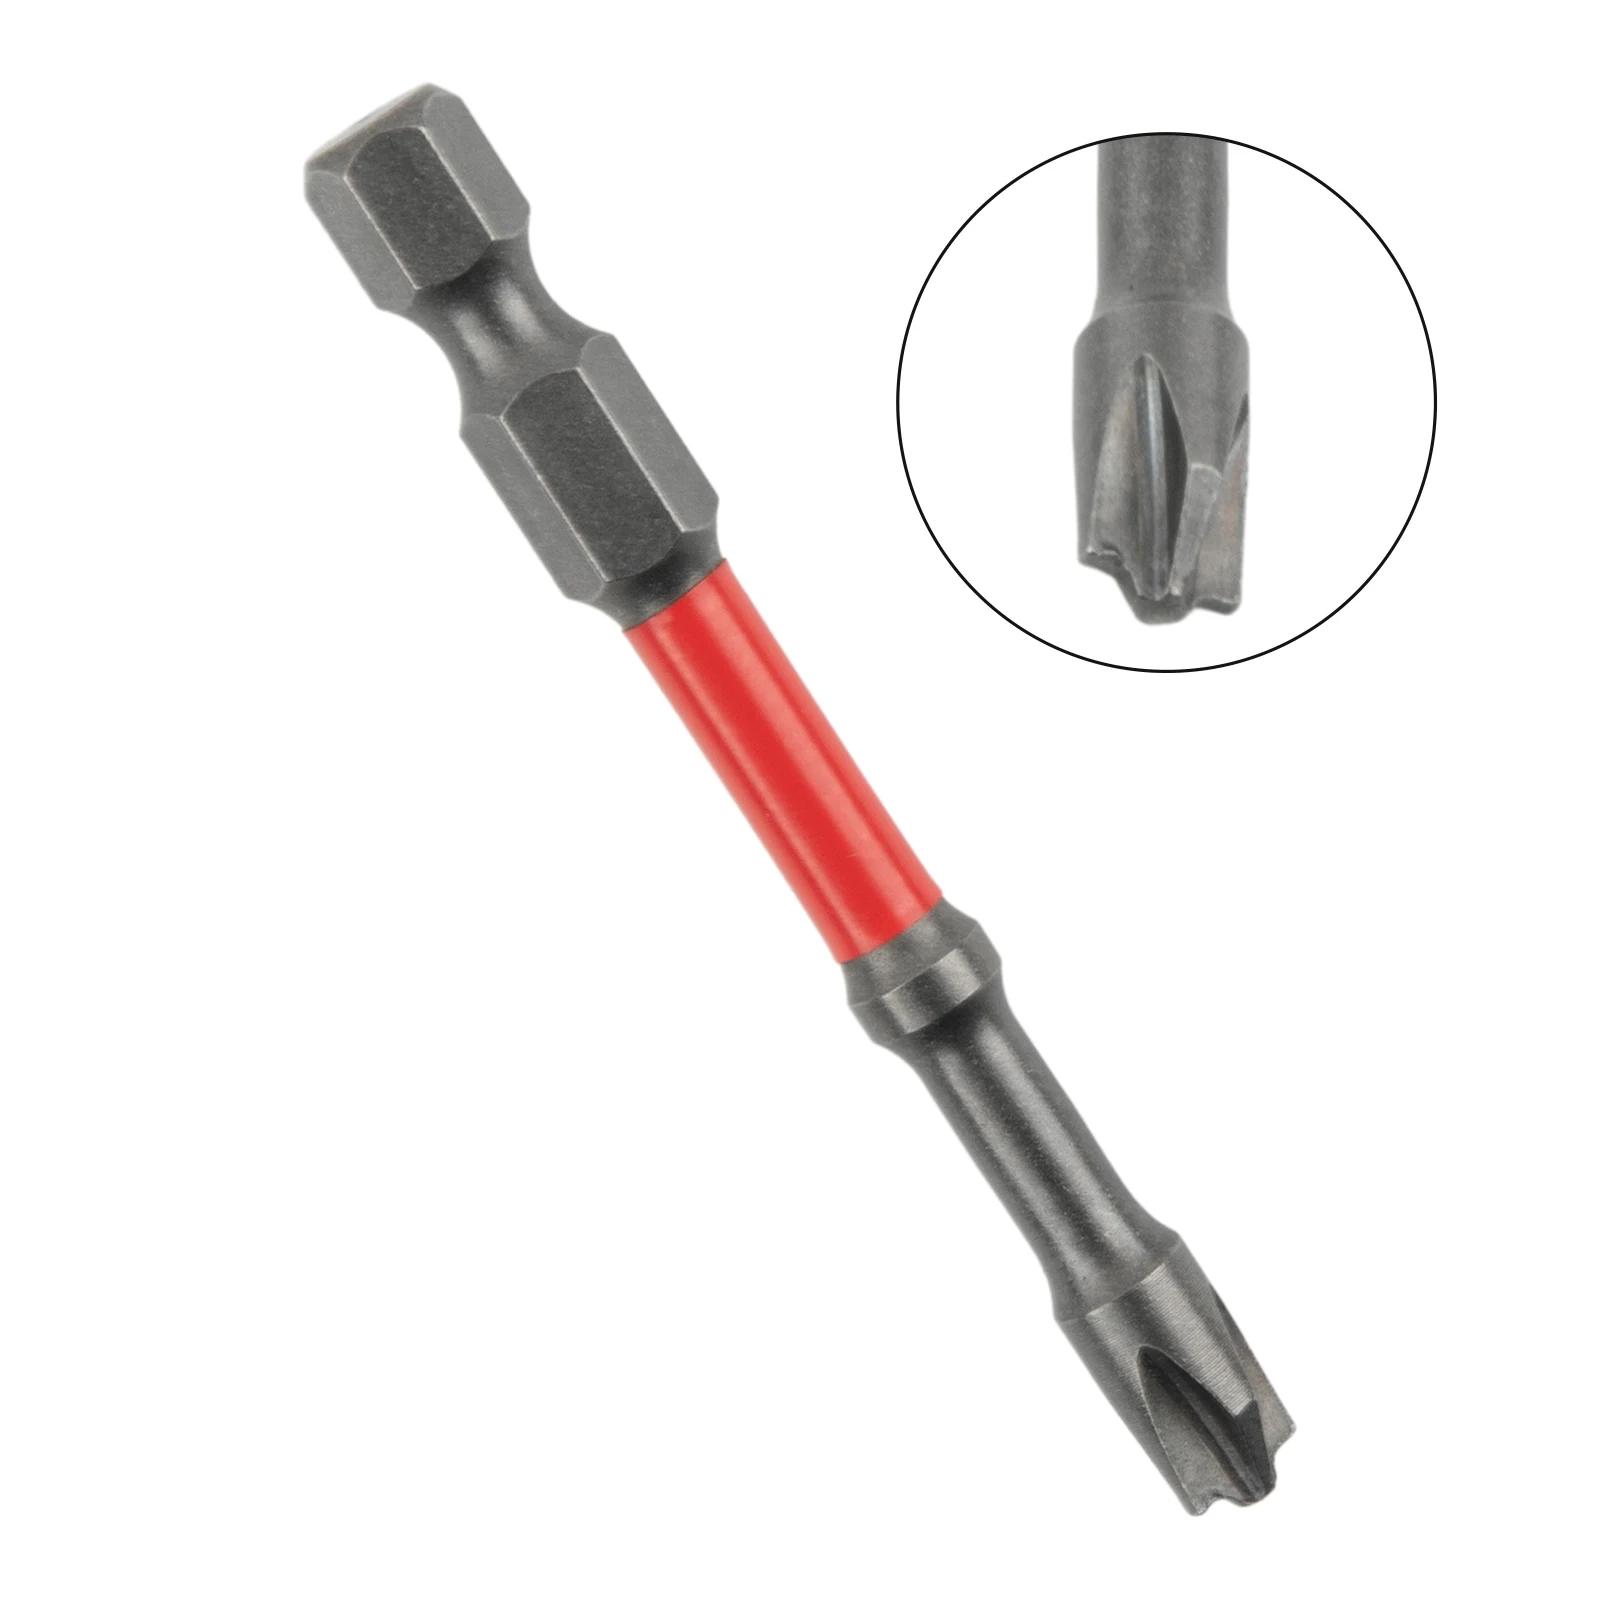 

Circuit Breakers Screwdriver Bit Electricians Special 6mm Head Alloy Steel Anti-rust Cross FPH2 Magnetic Slotted